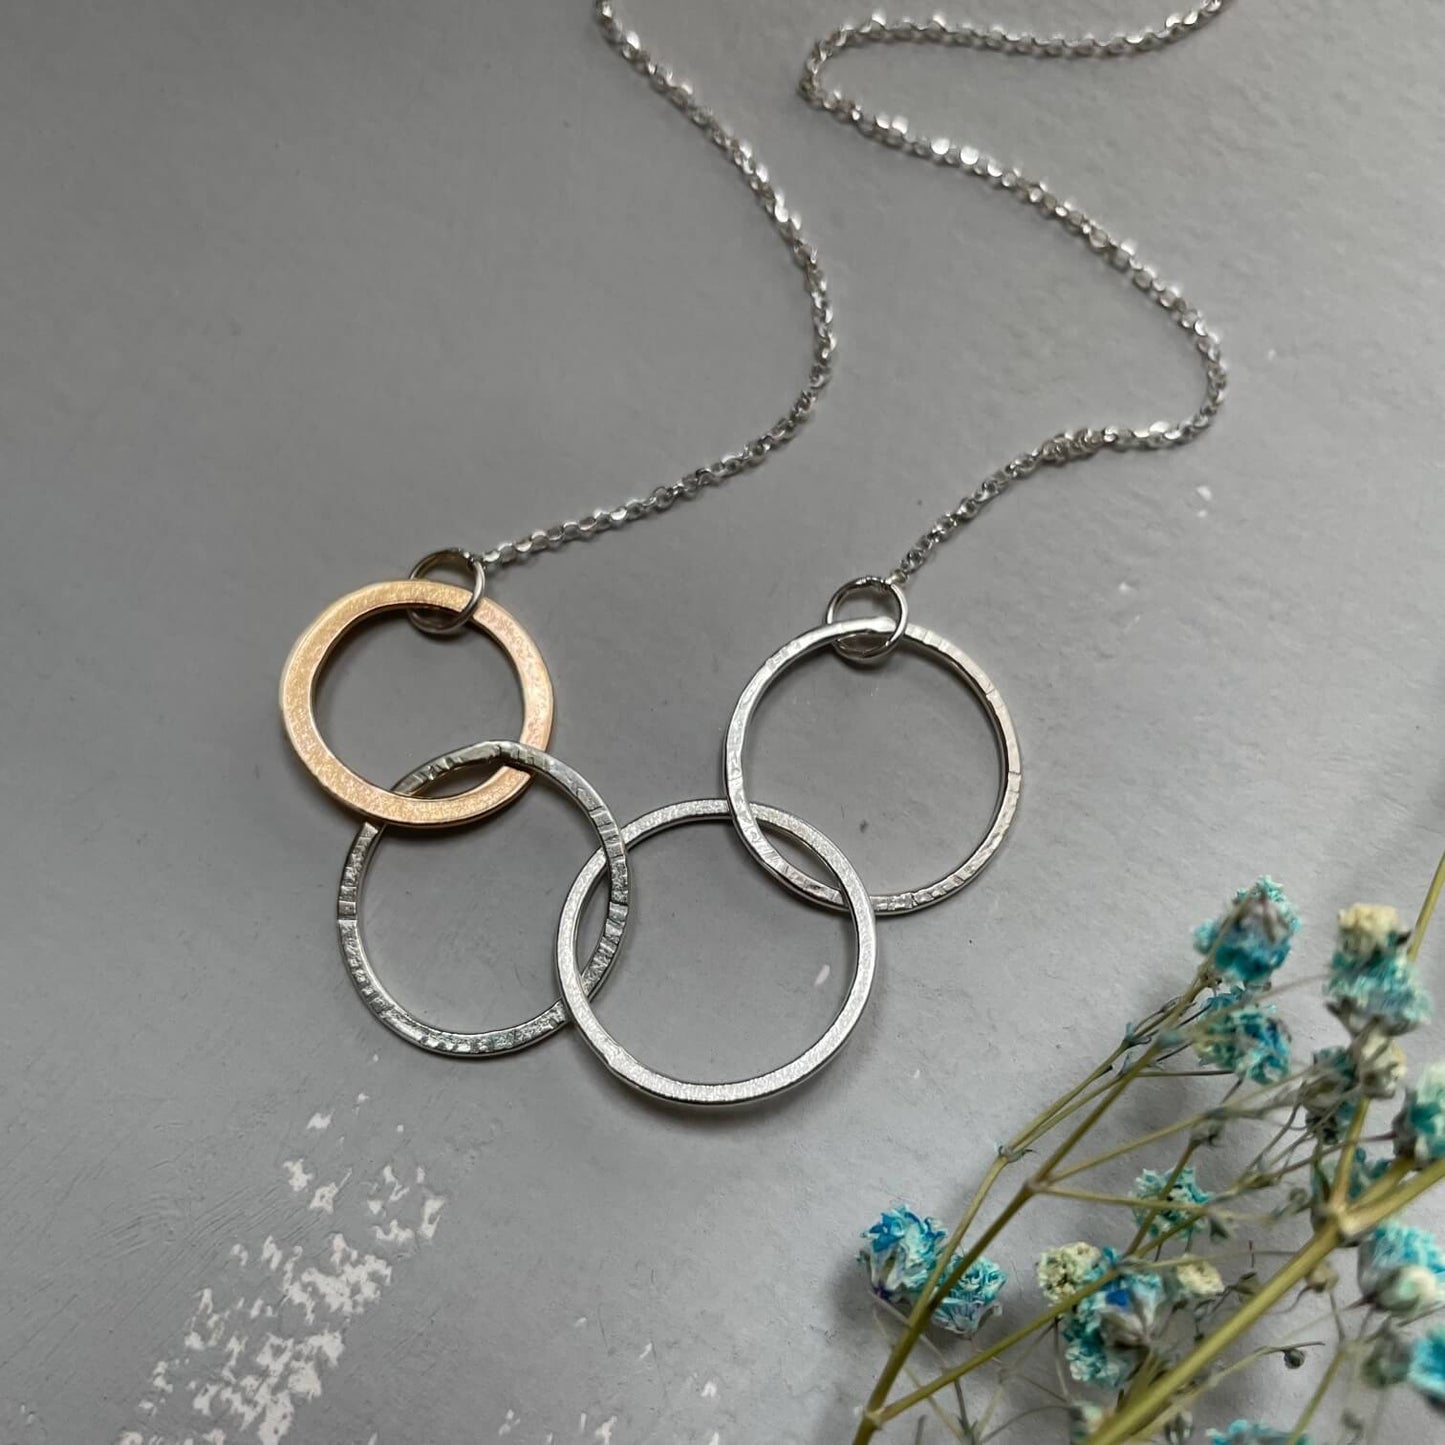 Ava & Bea Necklace Paper Print Silver & Rose Gold Filled Four Ring Necklace